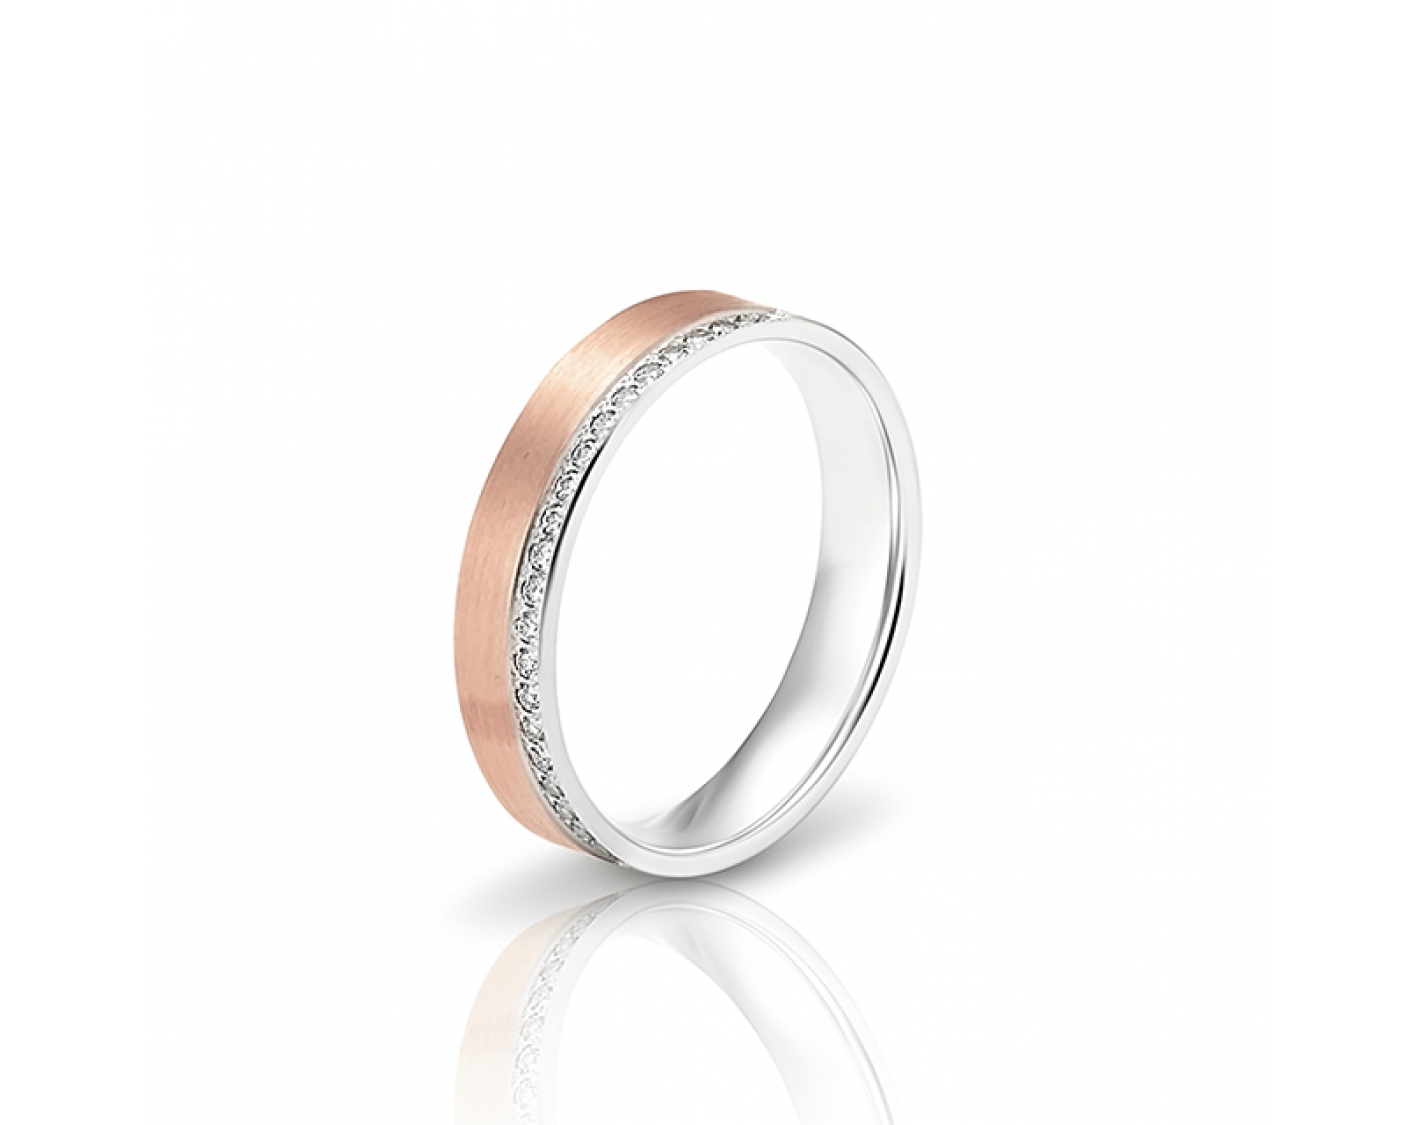 18k rose gold 4,5mm two-toned* matte half eternity wedding band with a shiny edge